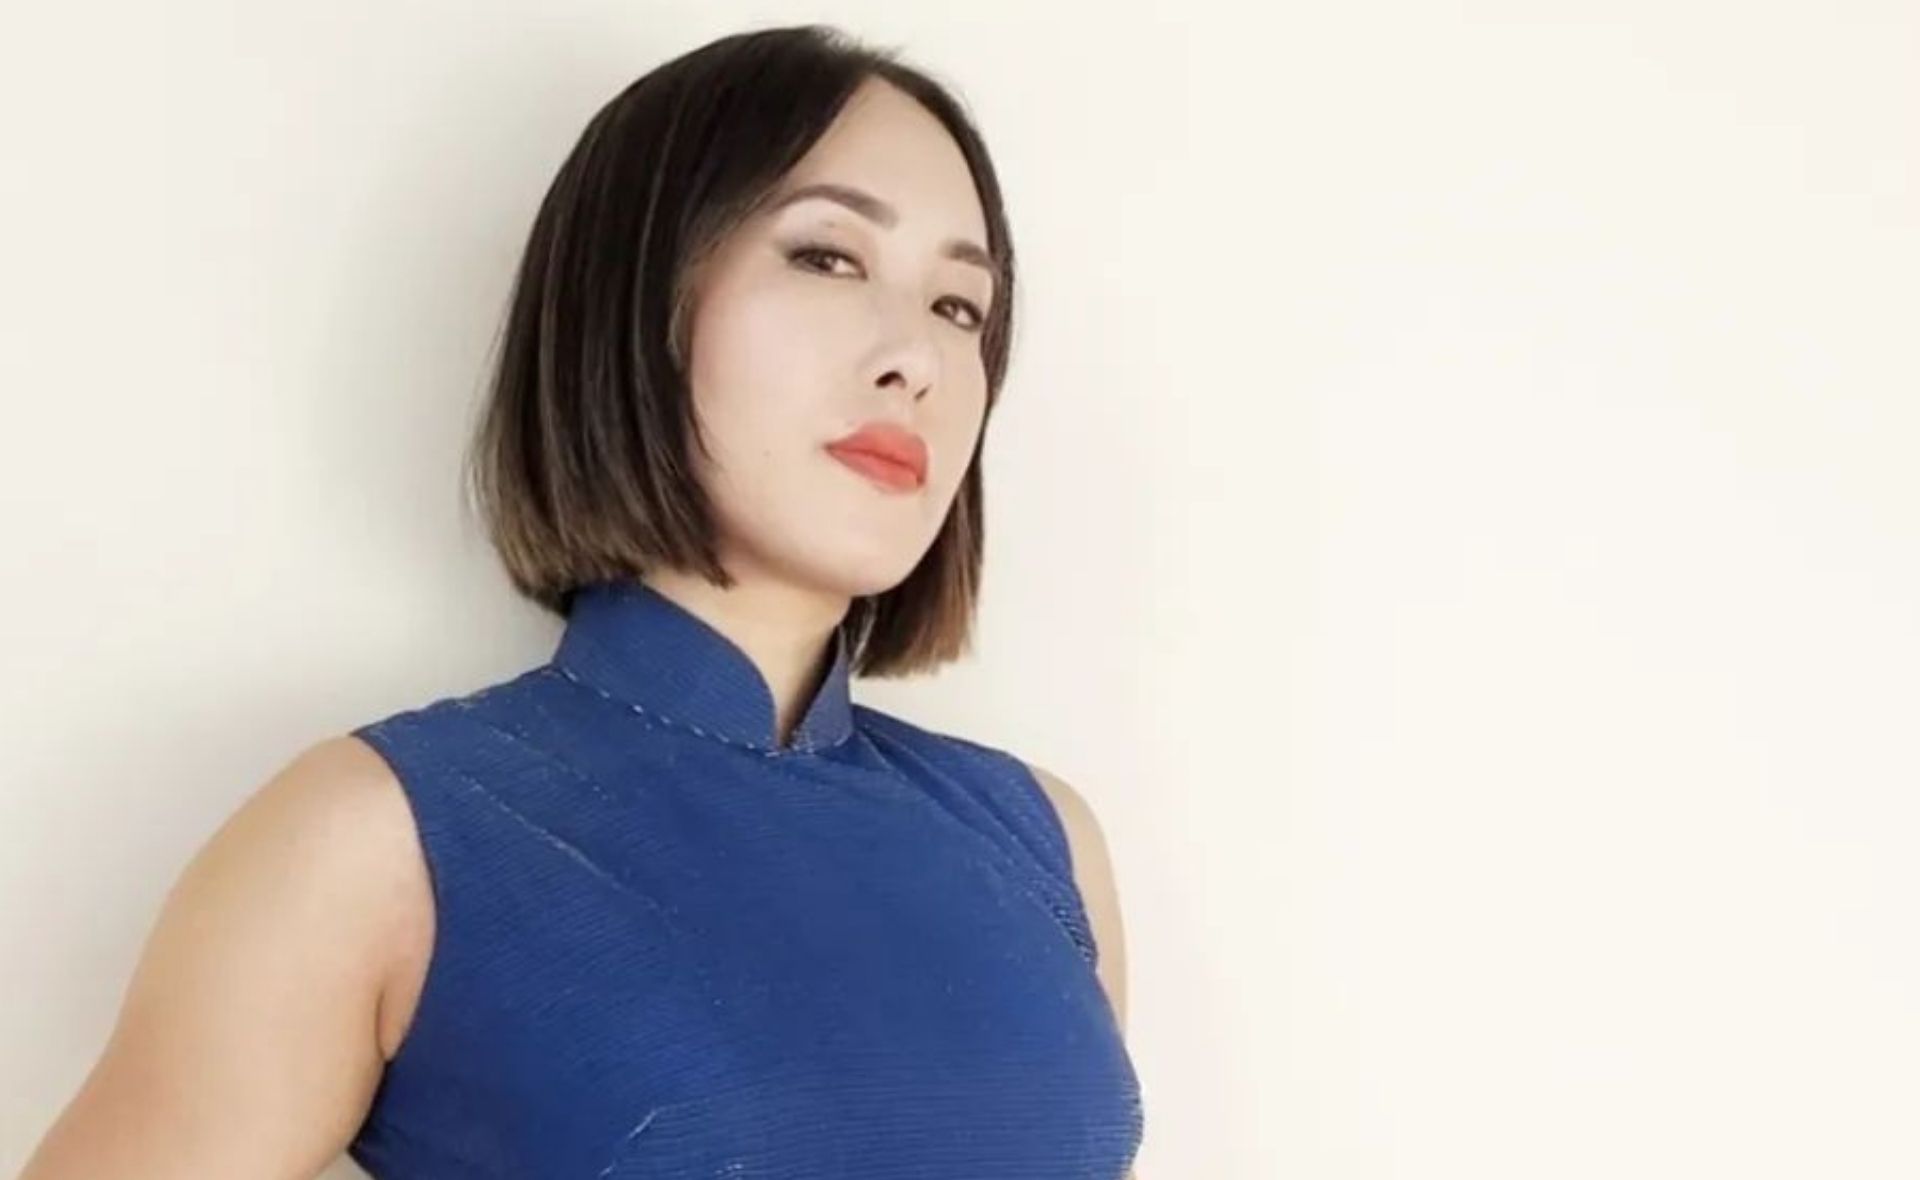 Melissa Leong reveals she hasn’t seen her mum for two years while celebrating a bittersweet Lunar New Year